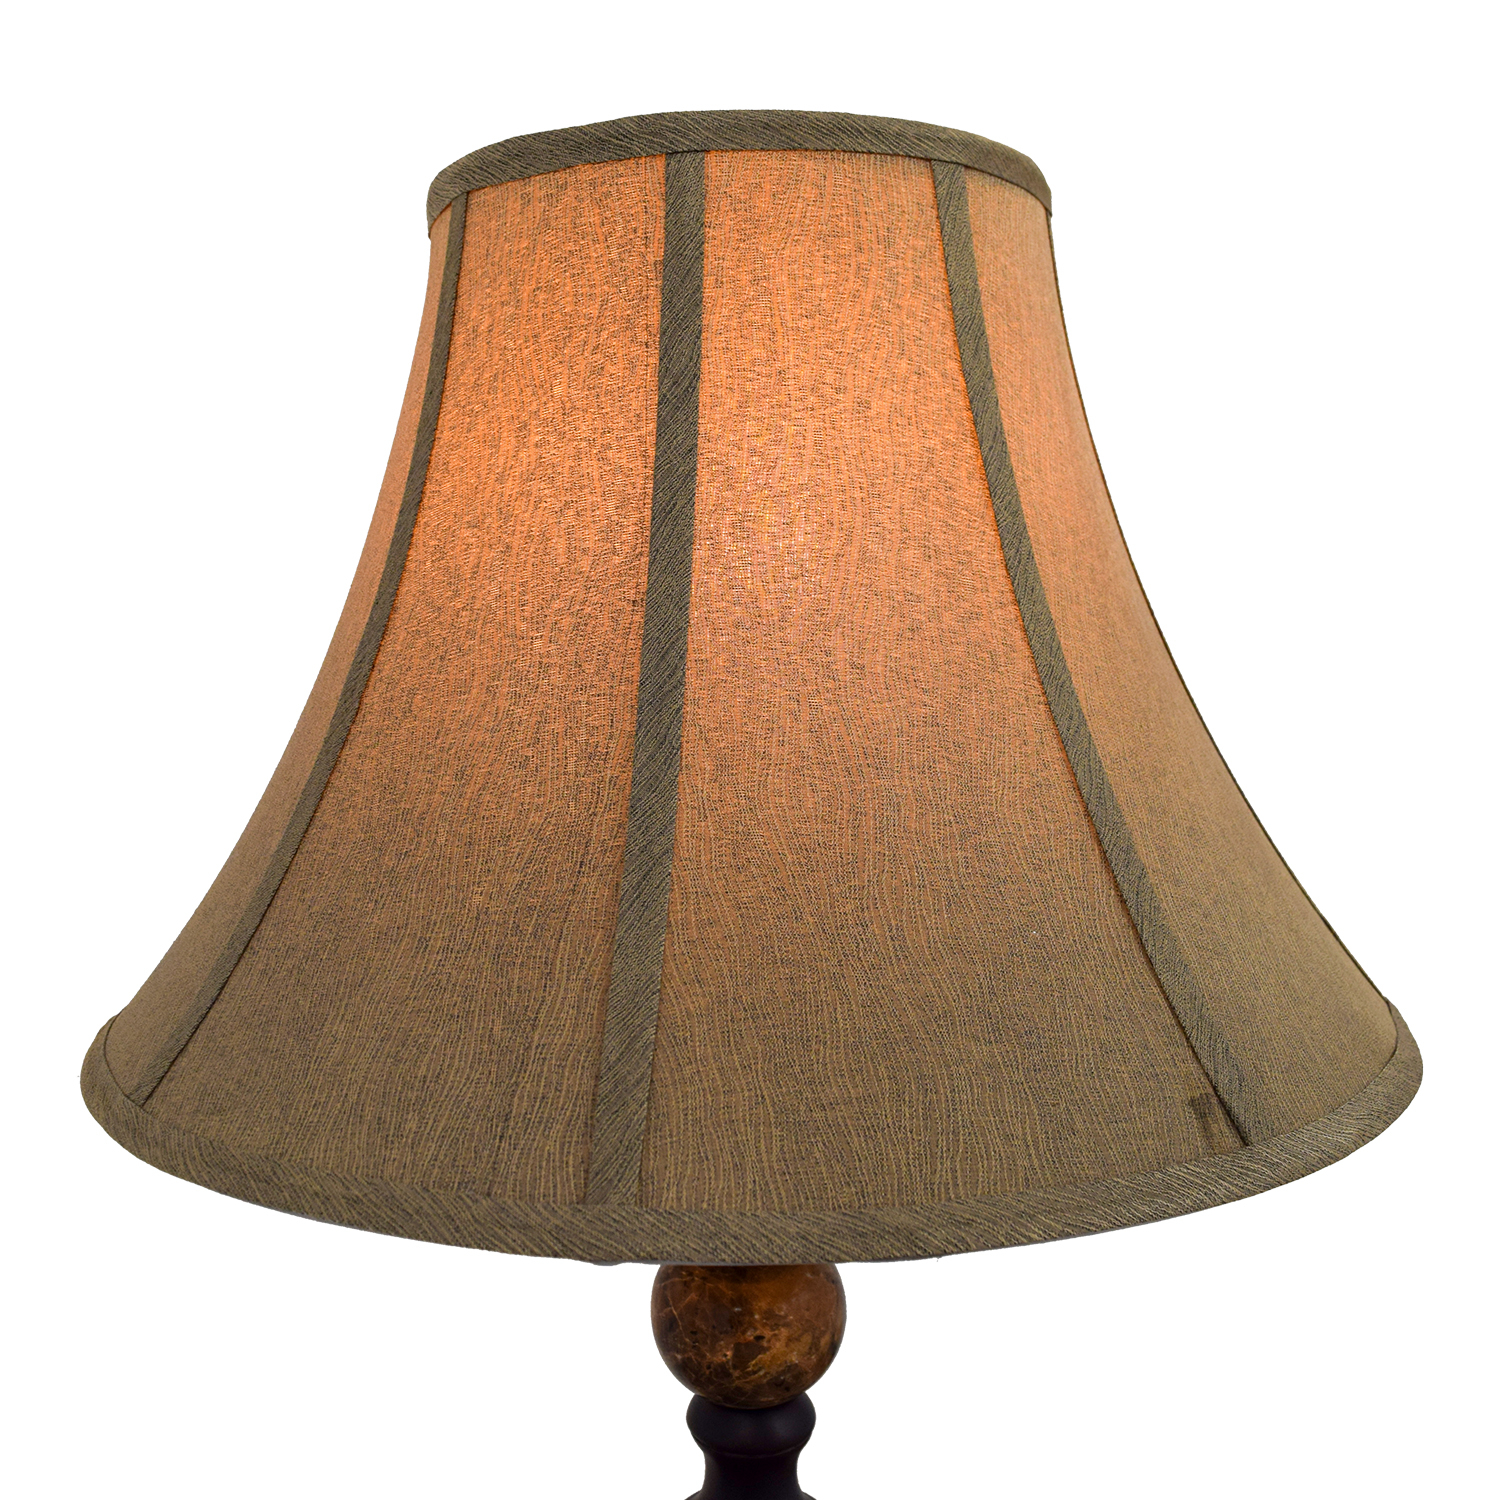 65 Off Raymour Flanigan Raymour Flanigan Marble And Wood Table Lamp Decor pertaining to measurements 1500 X 1500